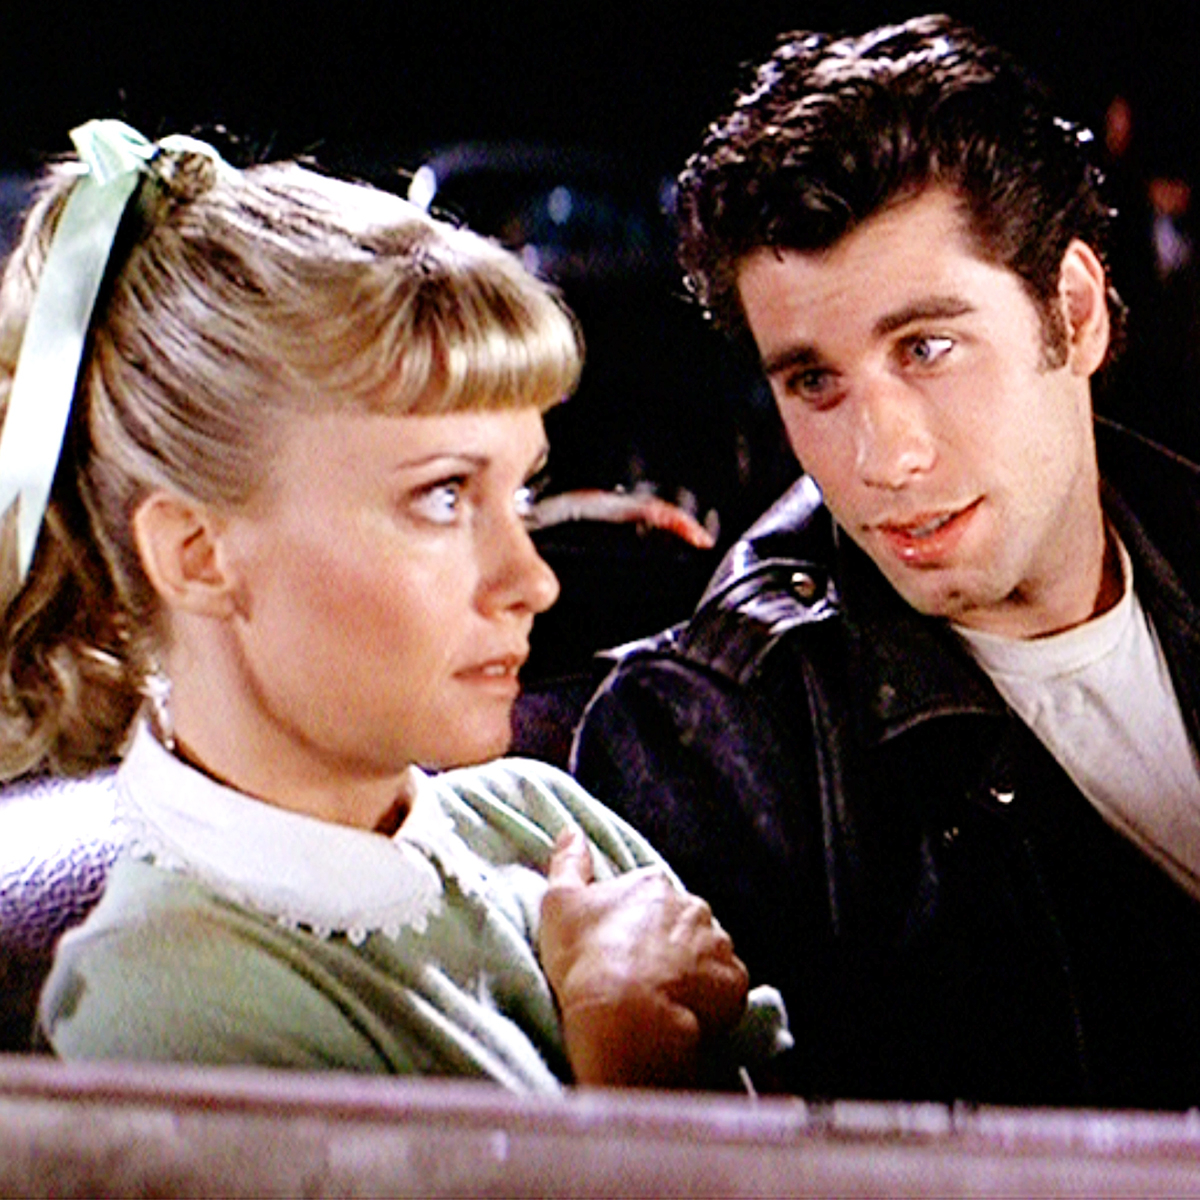 https://akns-images.eonline.com/eol_images/Entire_Site/202366/rs_1200x1200-230706133752-1200-grease-GettyImages-1189257912.jpg?fit=around%7C1200:1200&output-quality=90&crop=1200:1200;center,top